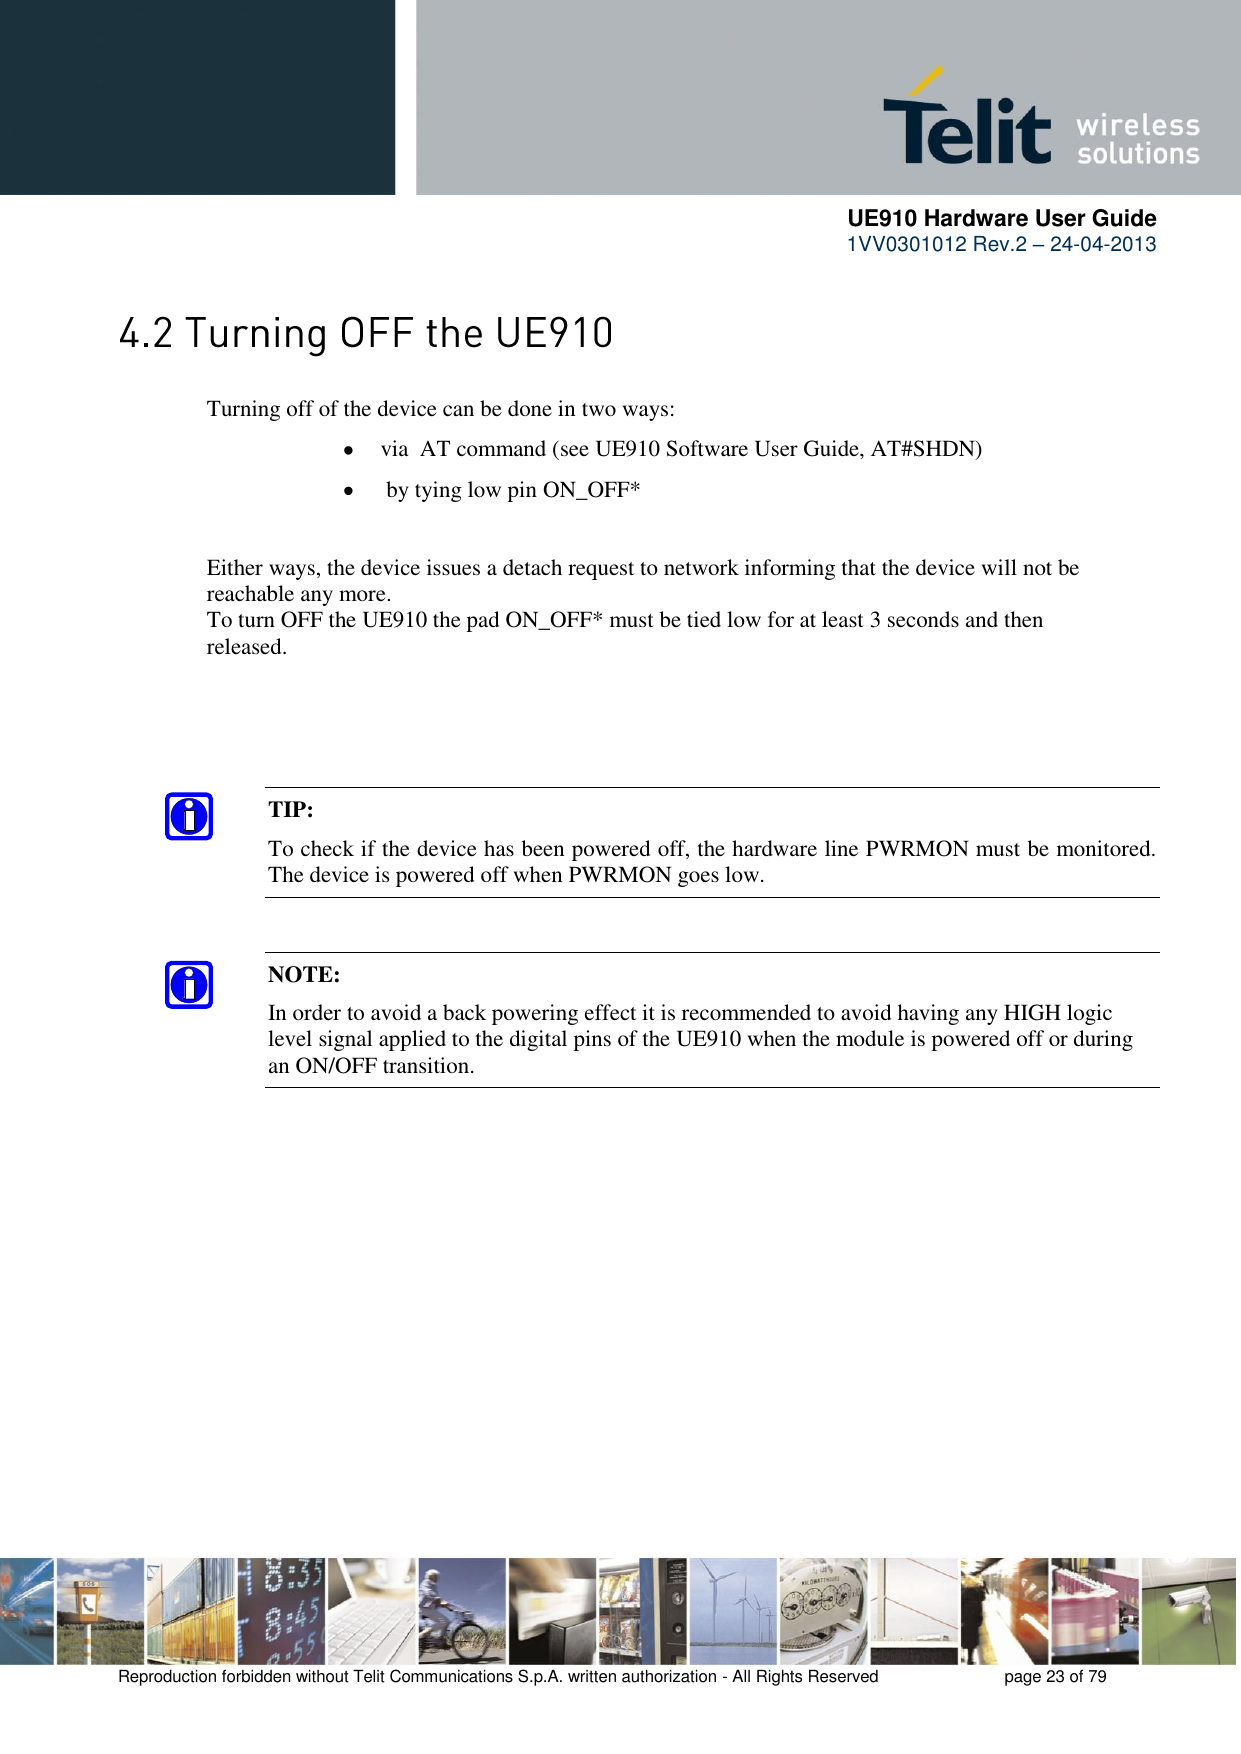      UE910 Hardware User Guide  1VV0301012 Rev.2 – 24-04-2013    Reproduction forbidden without Telit Communications S.p.A. written authorization - All Rights Reserved    page 23 of 79   Turning off of the device can be done in two ways:  via  AT command (see UE910 Software User Guide, AT#SHDN)   by tying low pin ON_OFF*    Either ways, the device issues a detach request to network informing that the device will not be   reachable any more.    To turn OFF the UE910 the pad ON_OFF* must be tied low for at least 3 seconds and then   released.  TIP:  To check if the device has been powered off, the hardware line PWRMON must be monitored. The device is powered off when PWRMON goes low. NOTE: In order to avoid a back powering effect it is recommended to avoid having any HIGH logic level signal applied to the digital pins of the UE910 when the module is powered off or during an ON/OFF transition. 